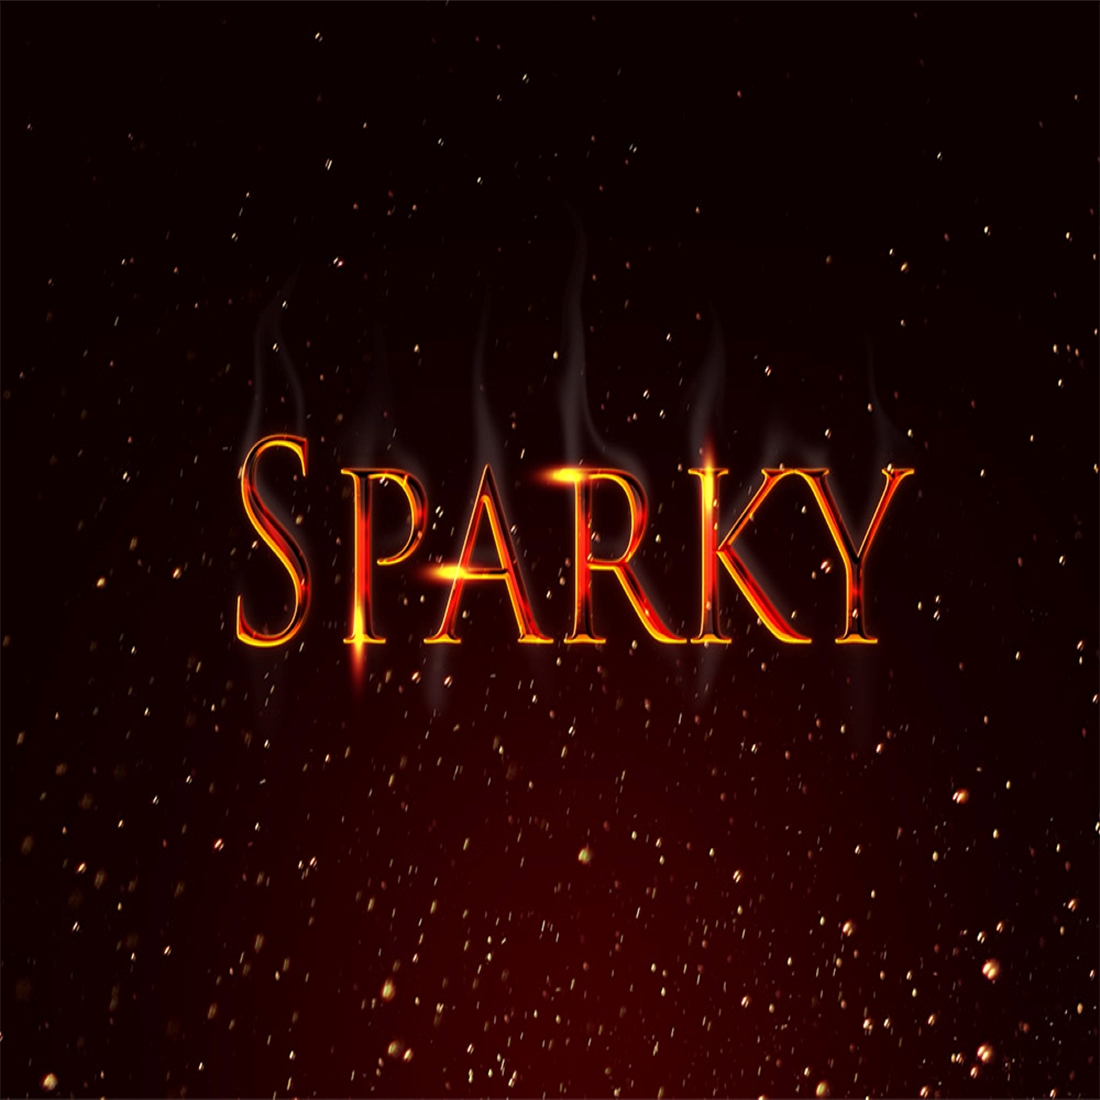 Sparky Text Effect cover image.